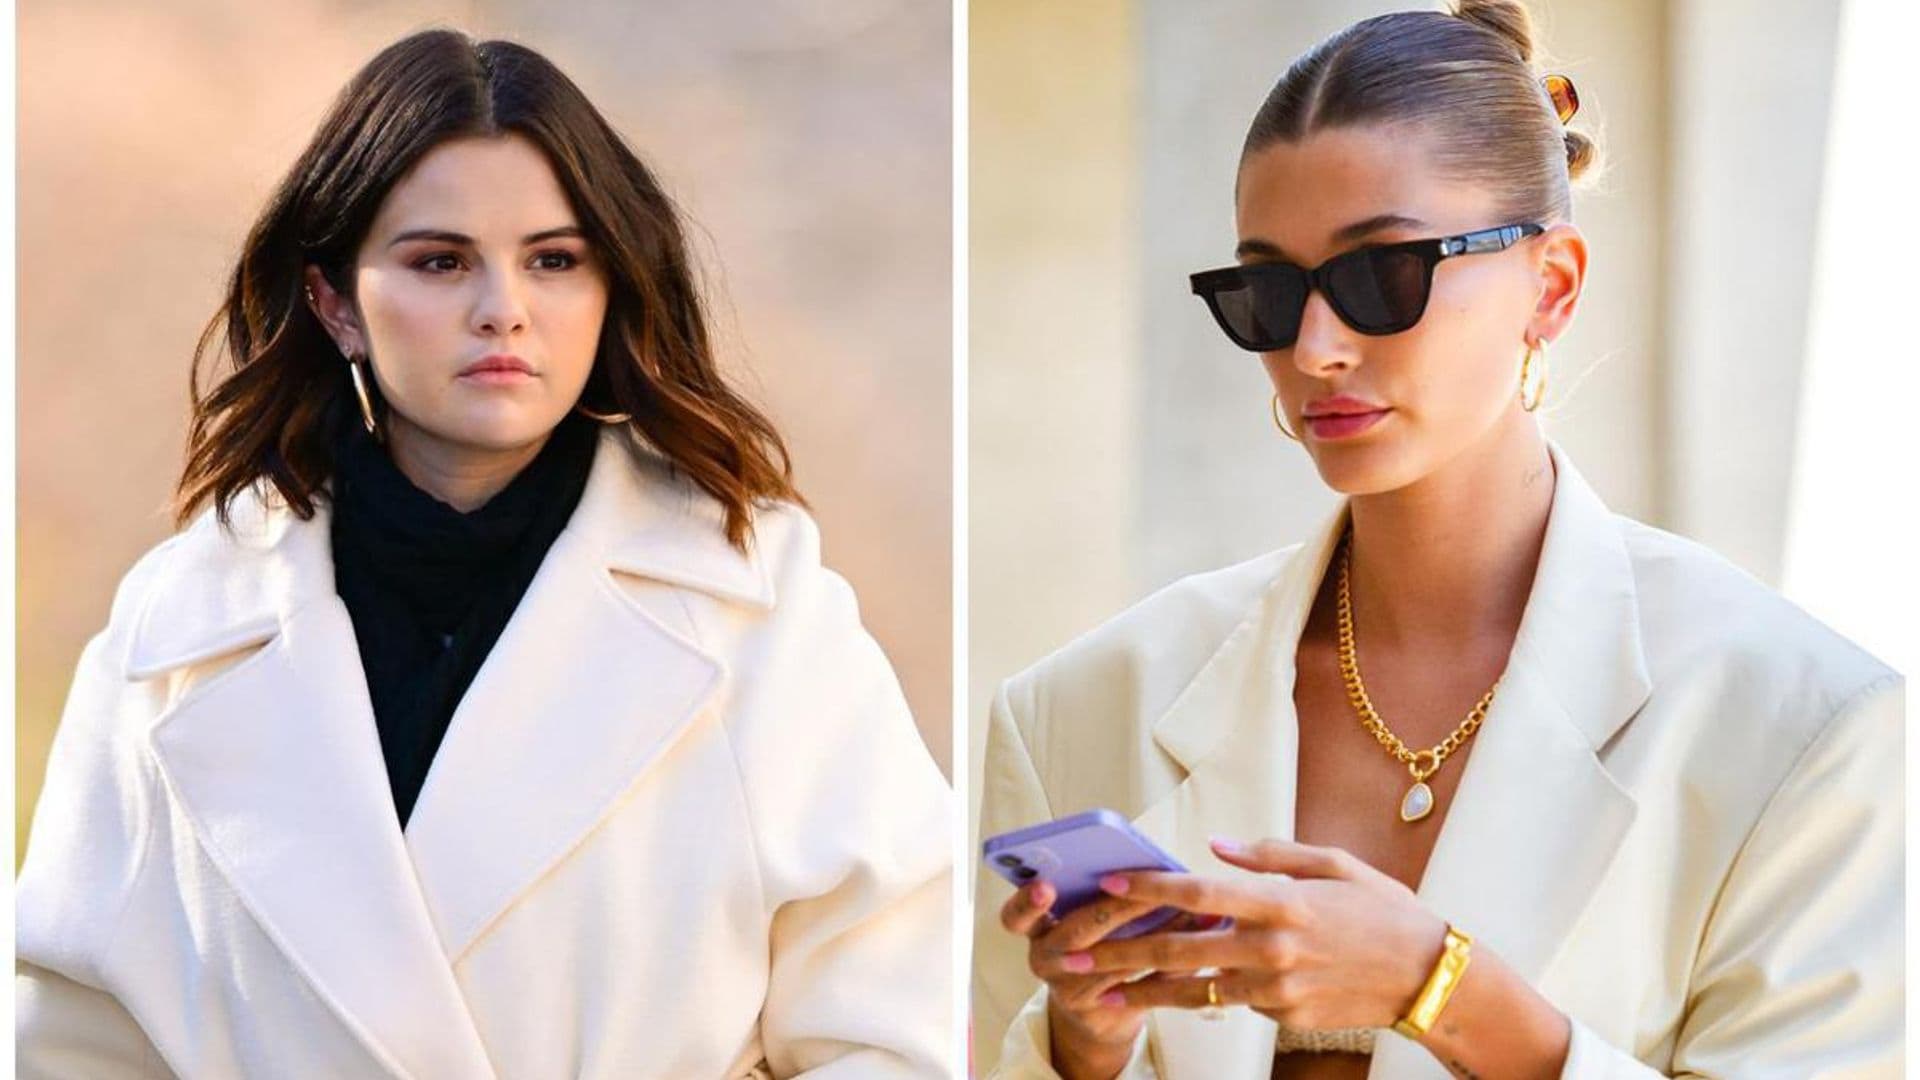 Selena Gomez reacts to Hailey Bieber's explosive 'Call Her Daddy' interview